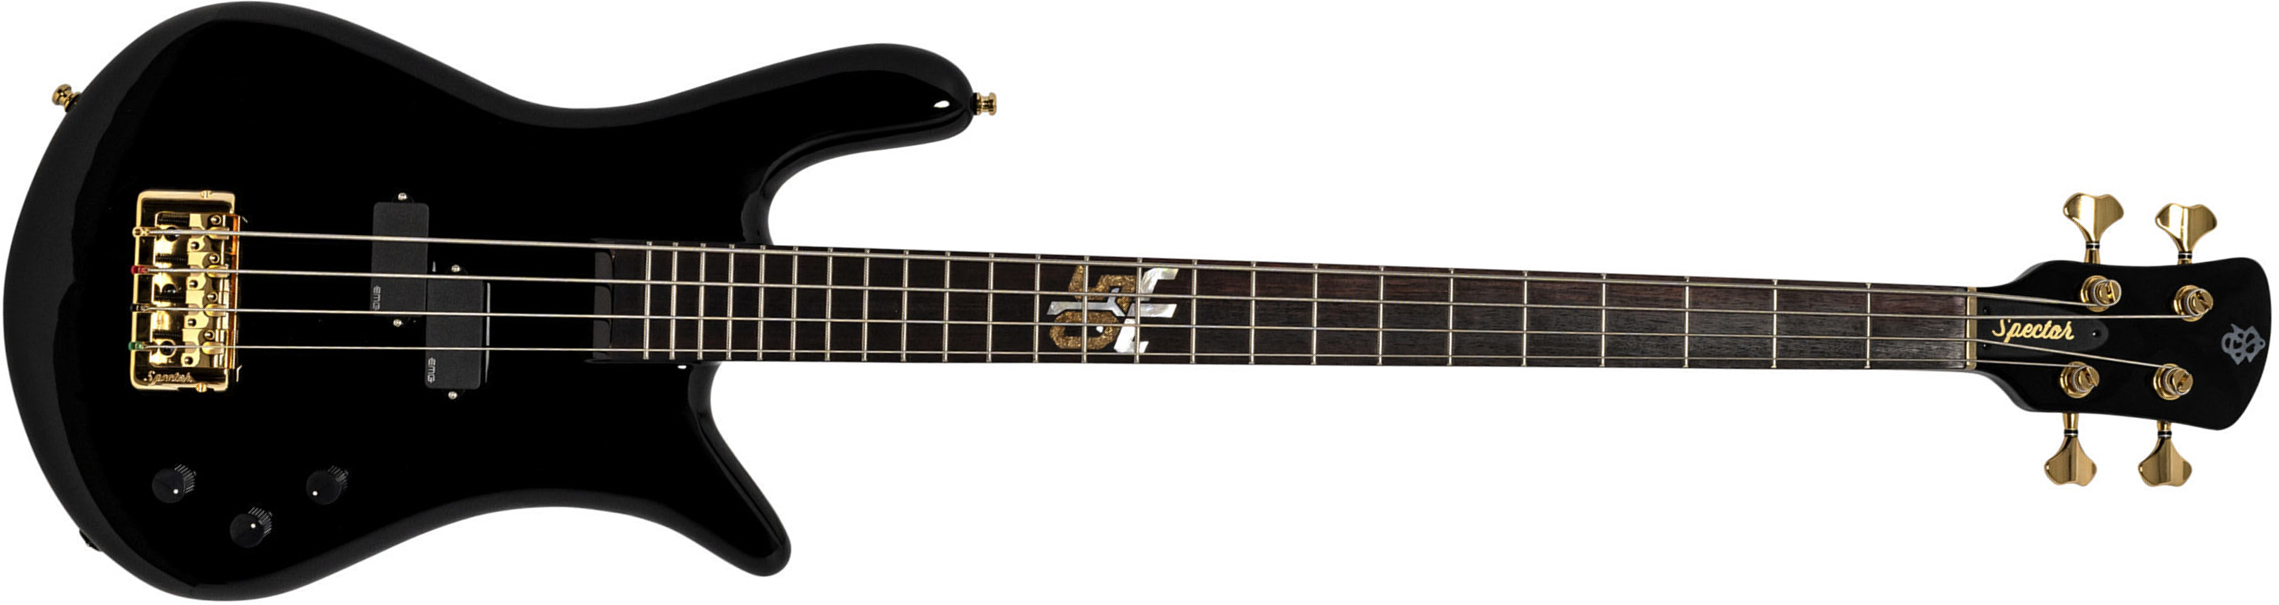 Spector Ian Hill Euro4 50th Anniversary Ltd Signature Active Emg Rw - Solid Black - Solid body electric bass - Main picture